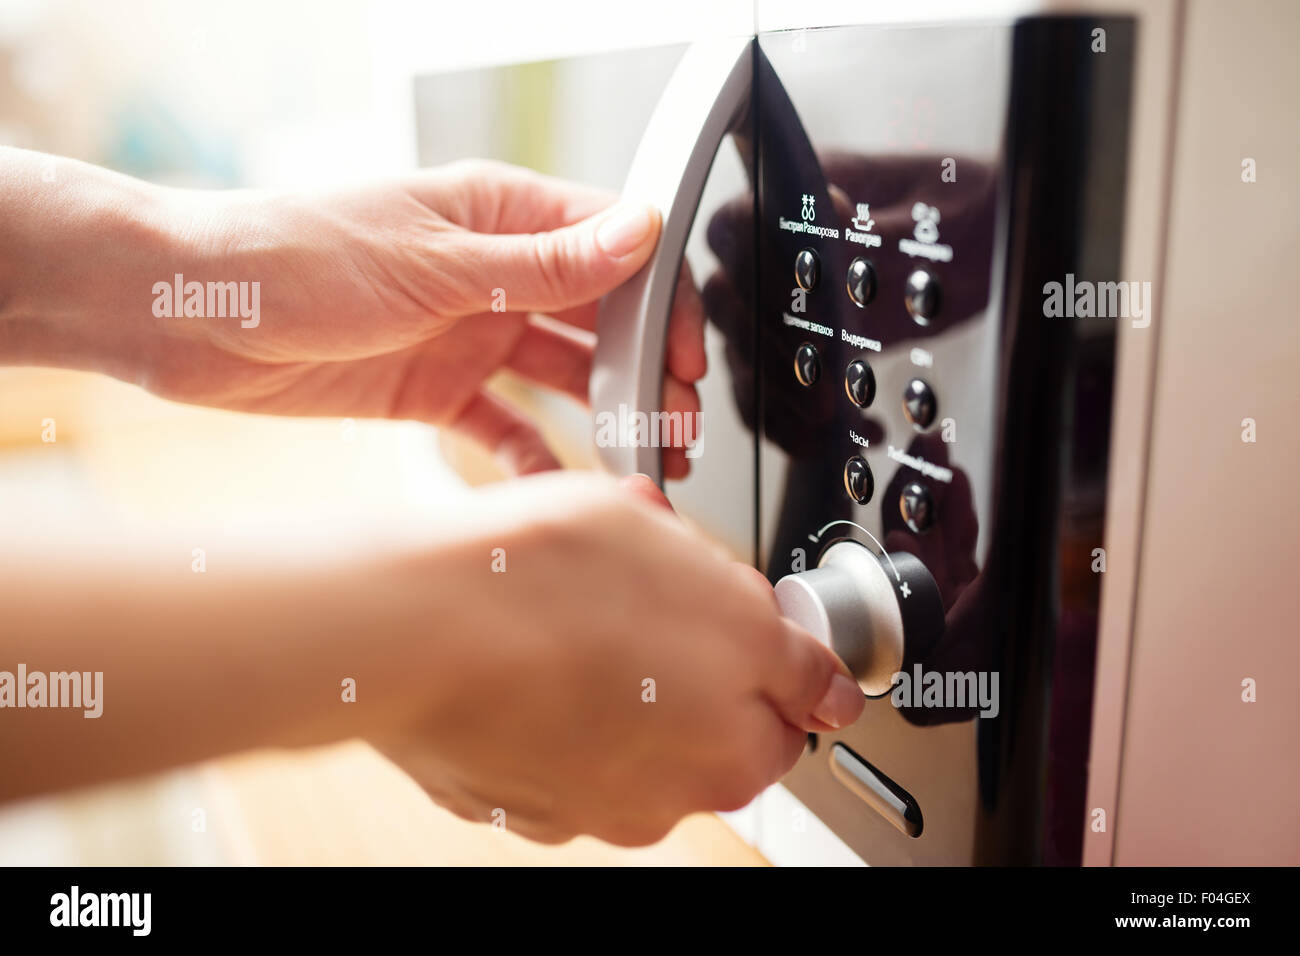 Using microwave oven, close up photo, shallow dof Stock Photo